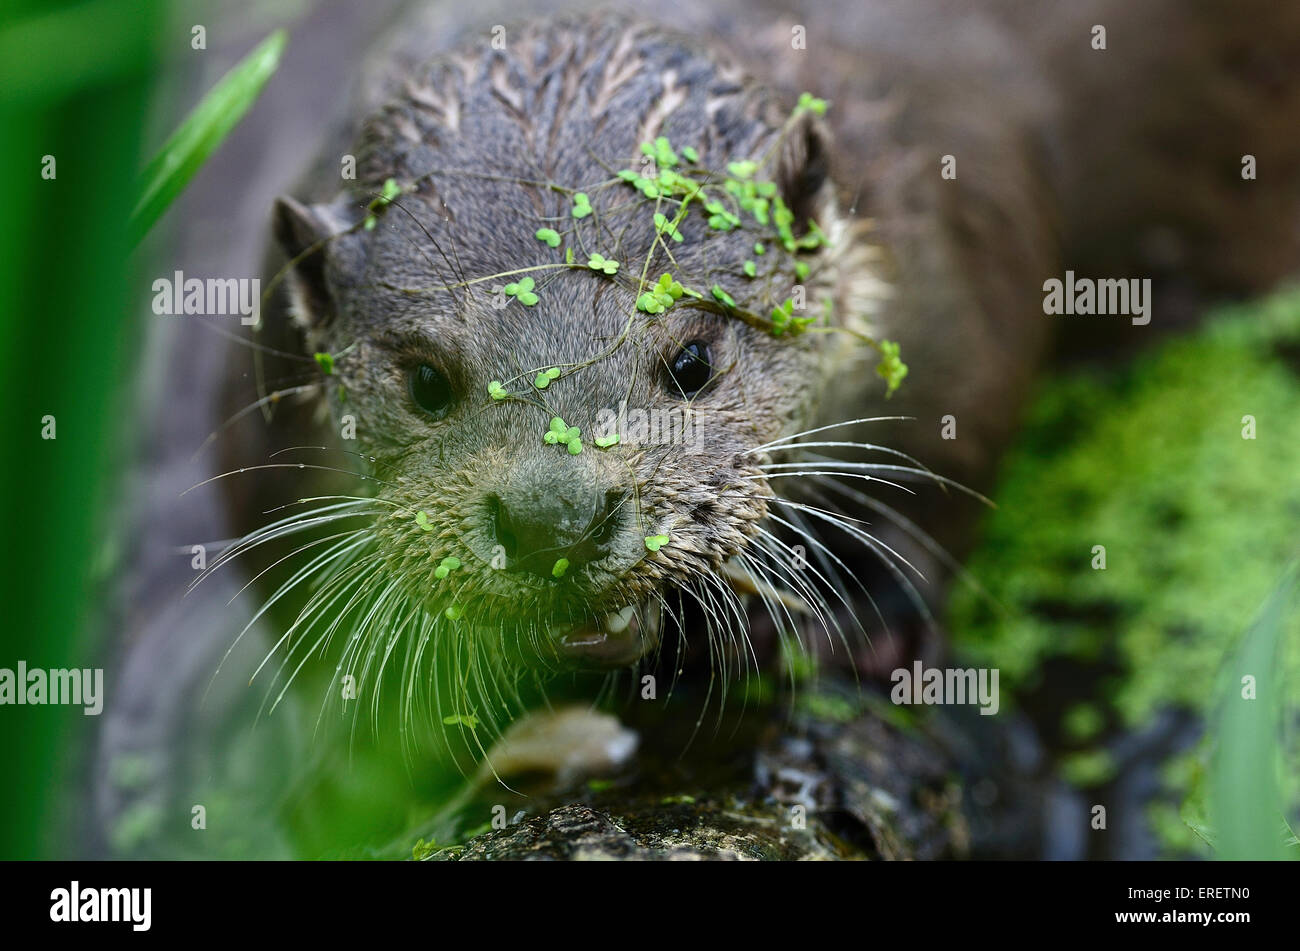 Otter in water with green weed UK Stock Photo